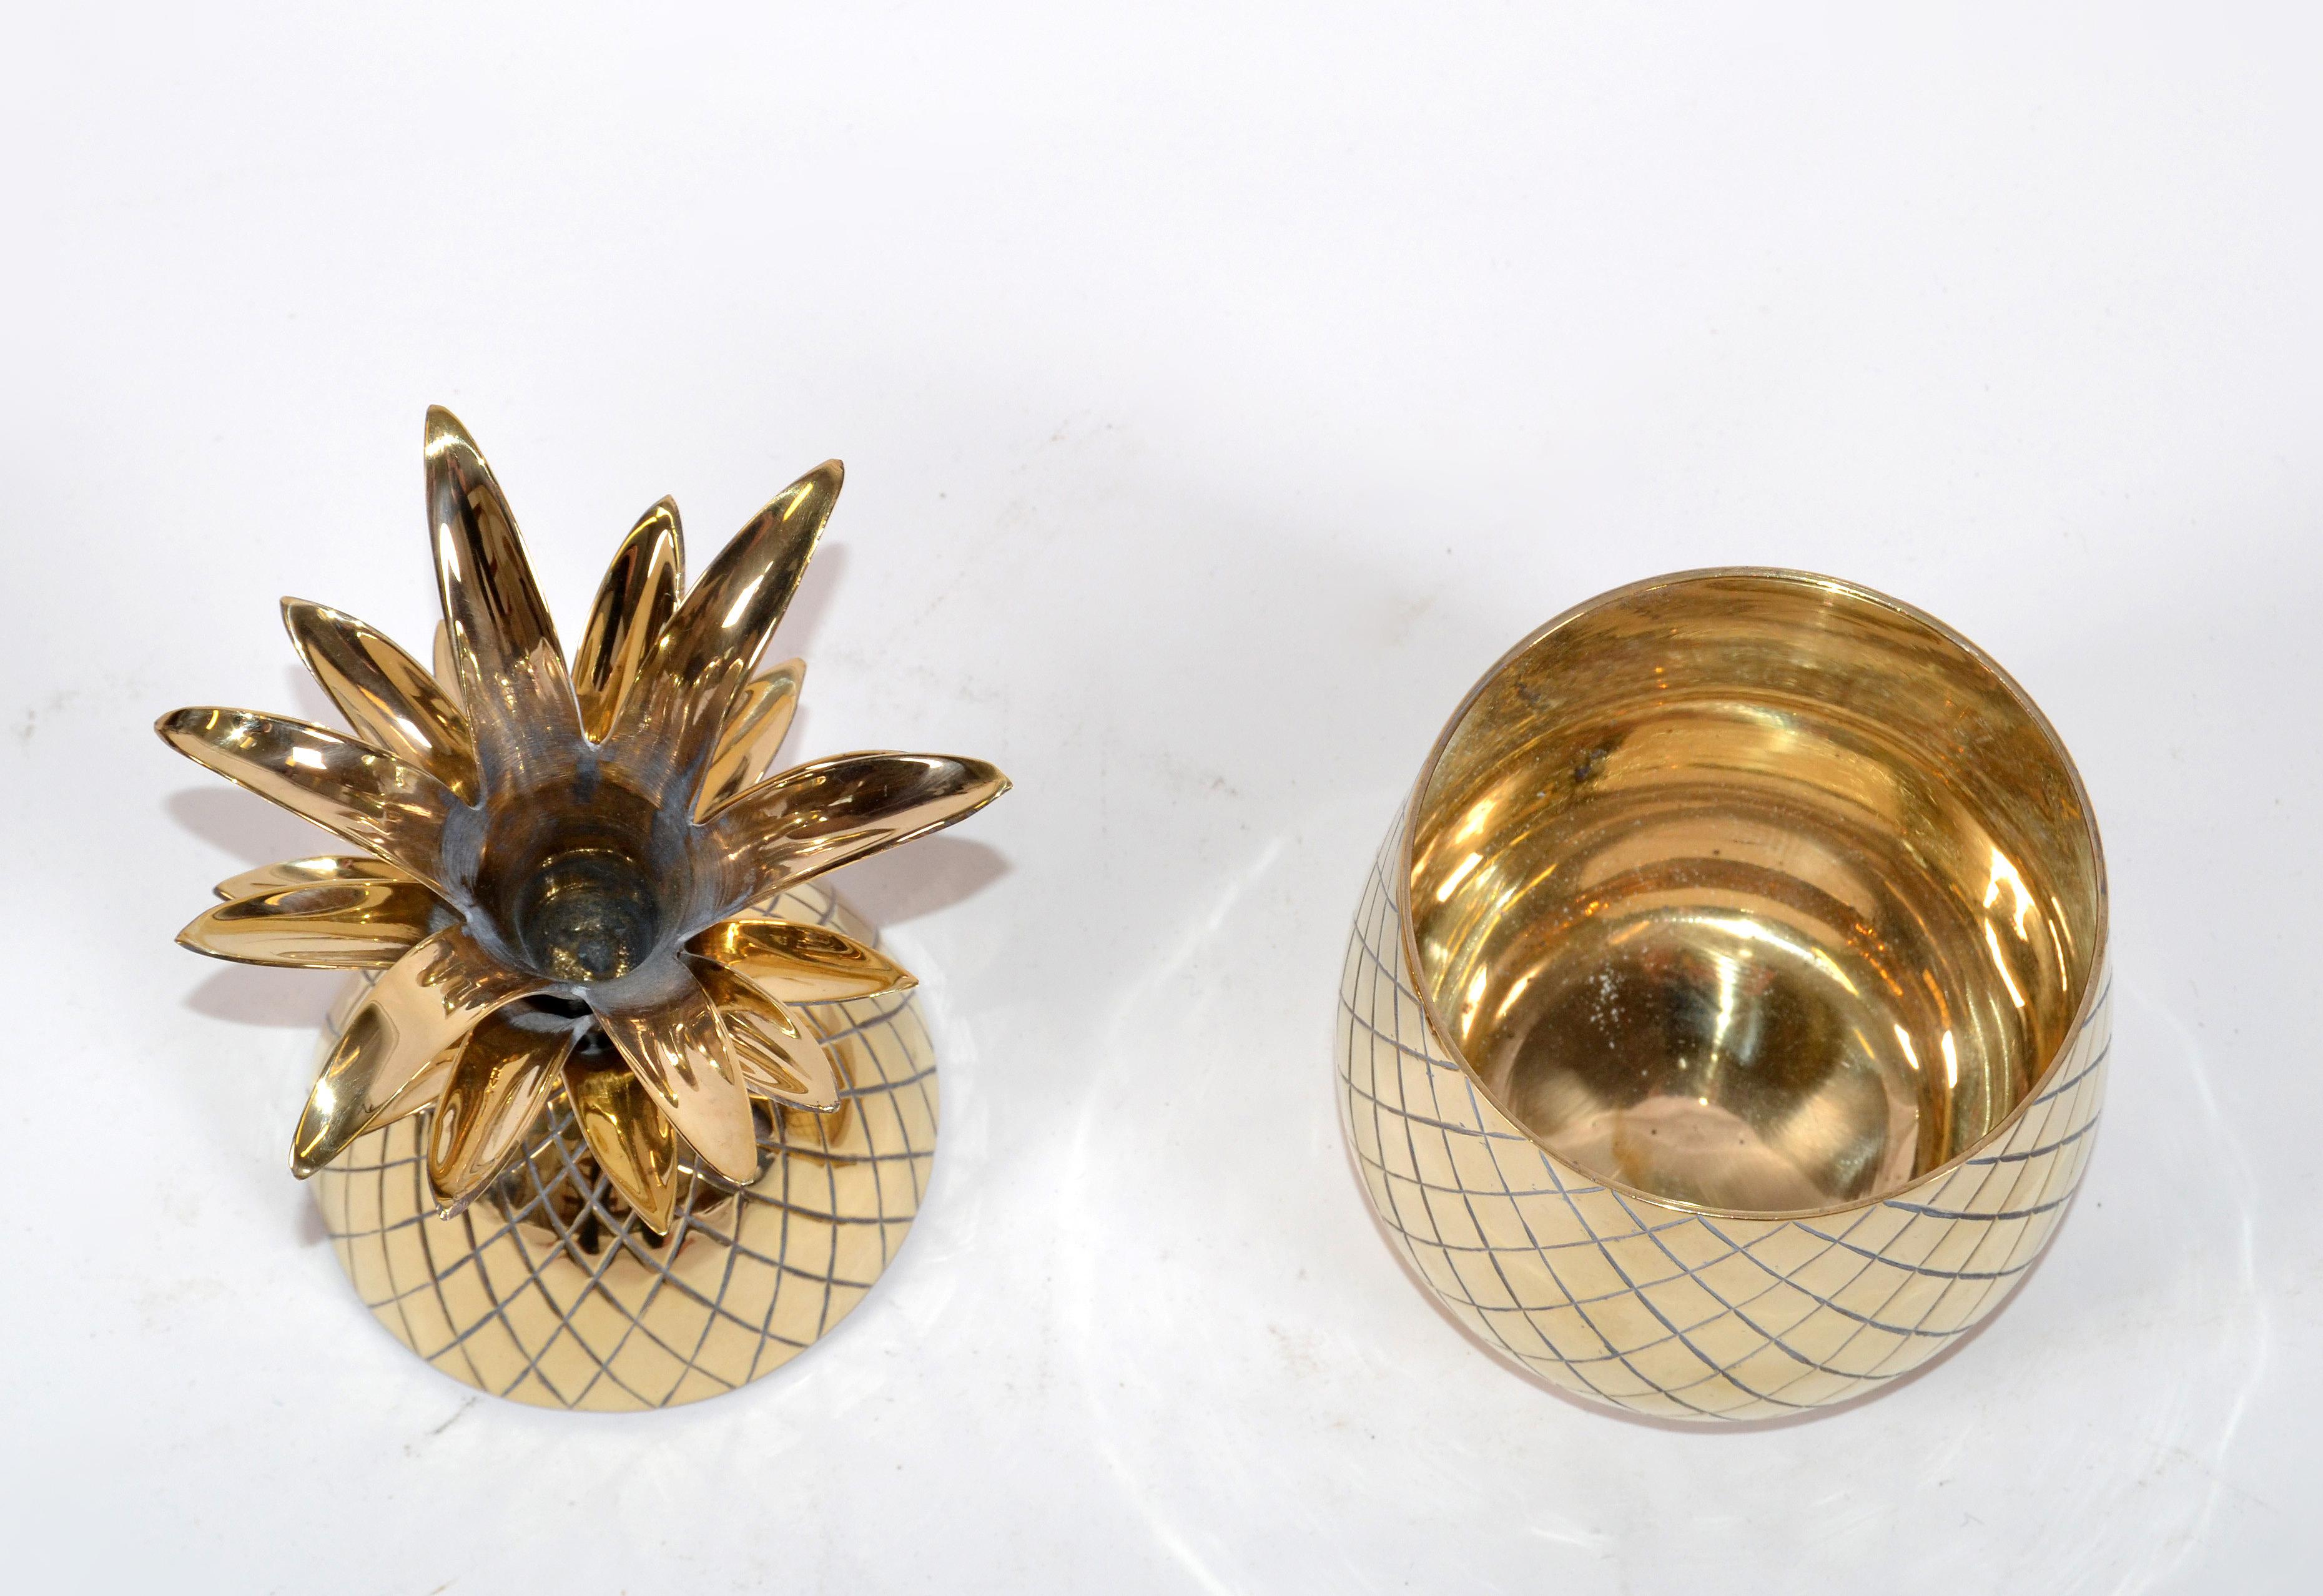 American Mid-Century Modern Large Brass Pineapple Pina Colada Cup Jar with Lid 1970 For Sale